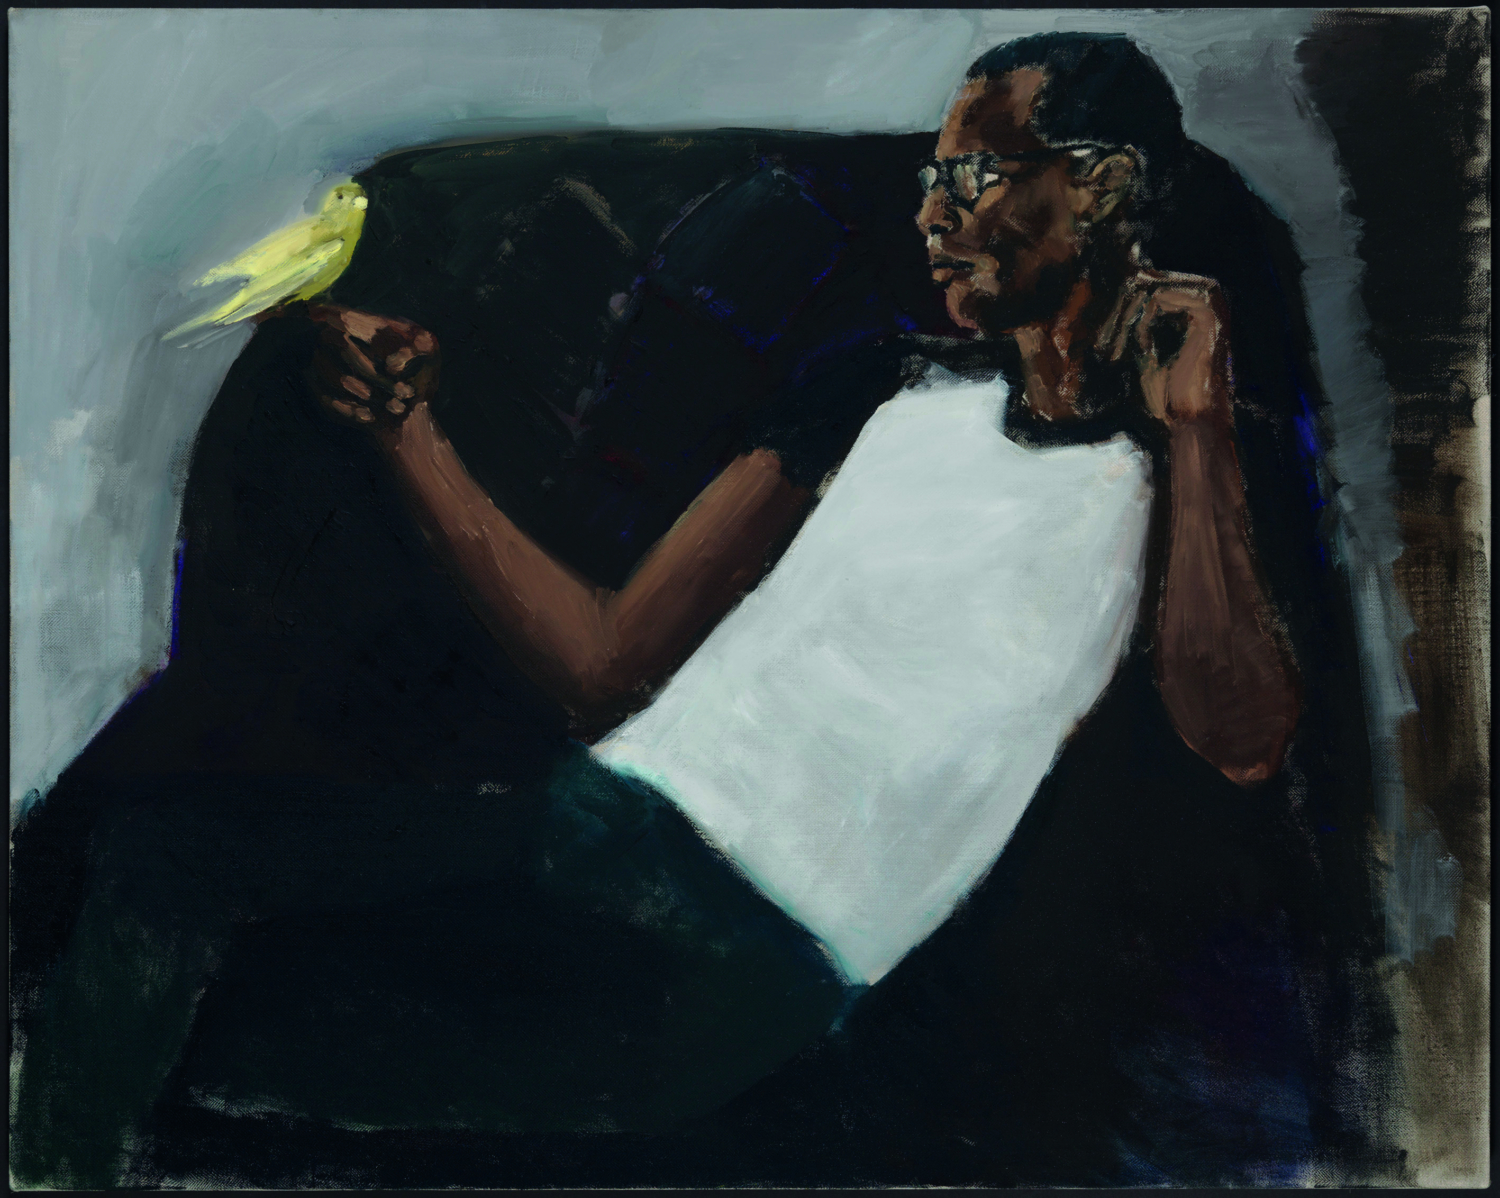 A painting by Lynette Yiadom-Boakye, representing a man lying on a sofa holding a yellow bird in his hand.